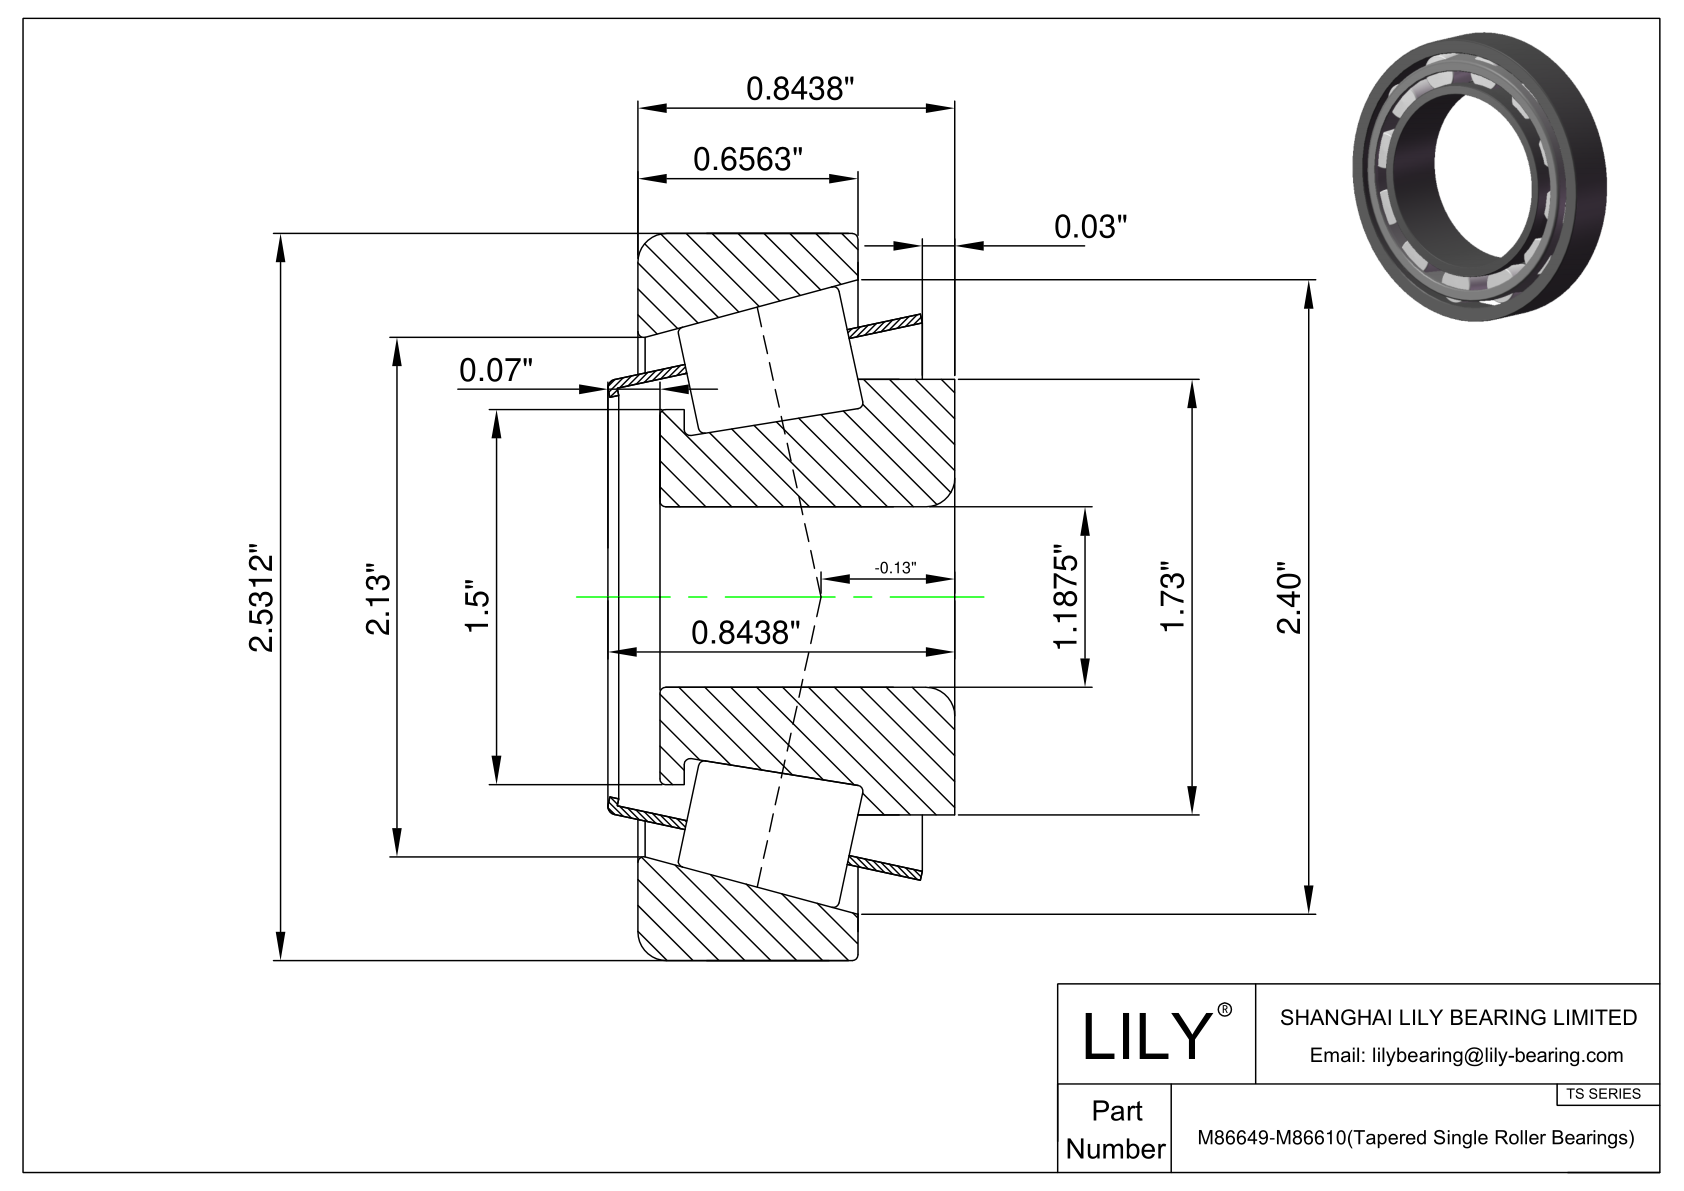 M86649-M86610 TS (Tapered Single Roller Bearings) (Imperial) cad drawing